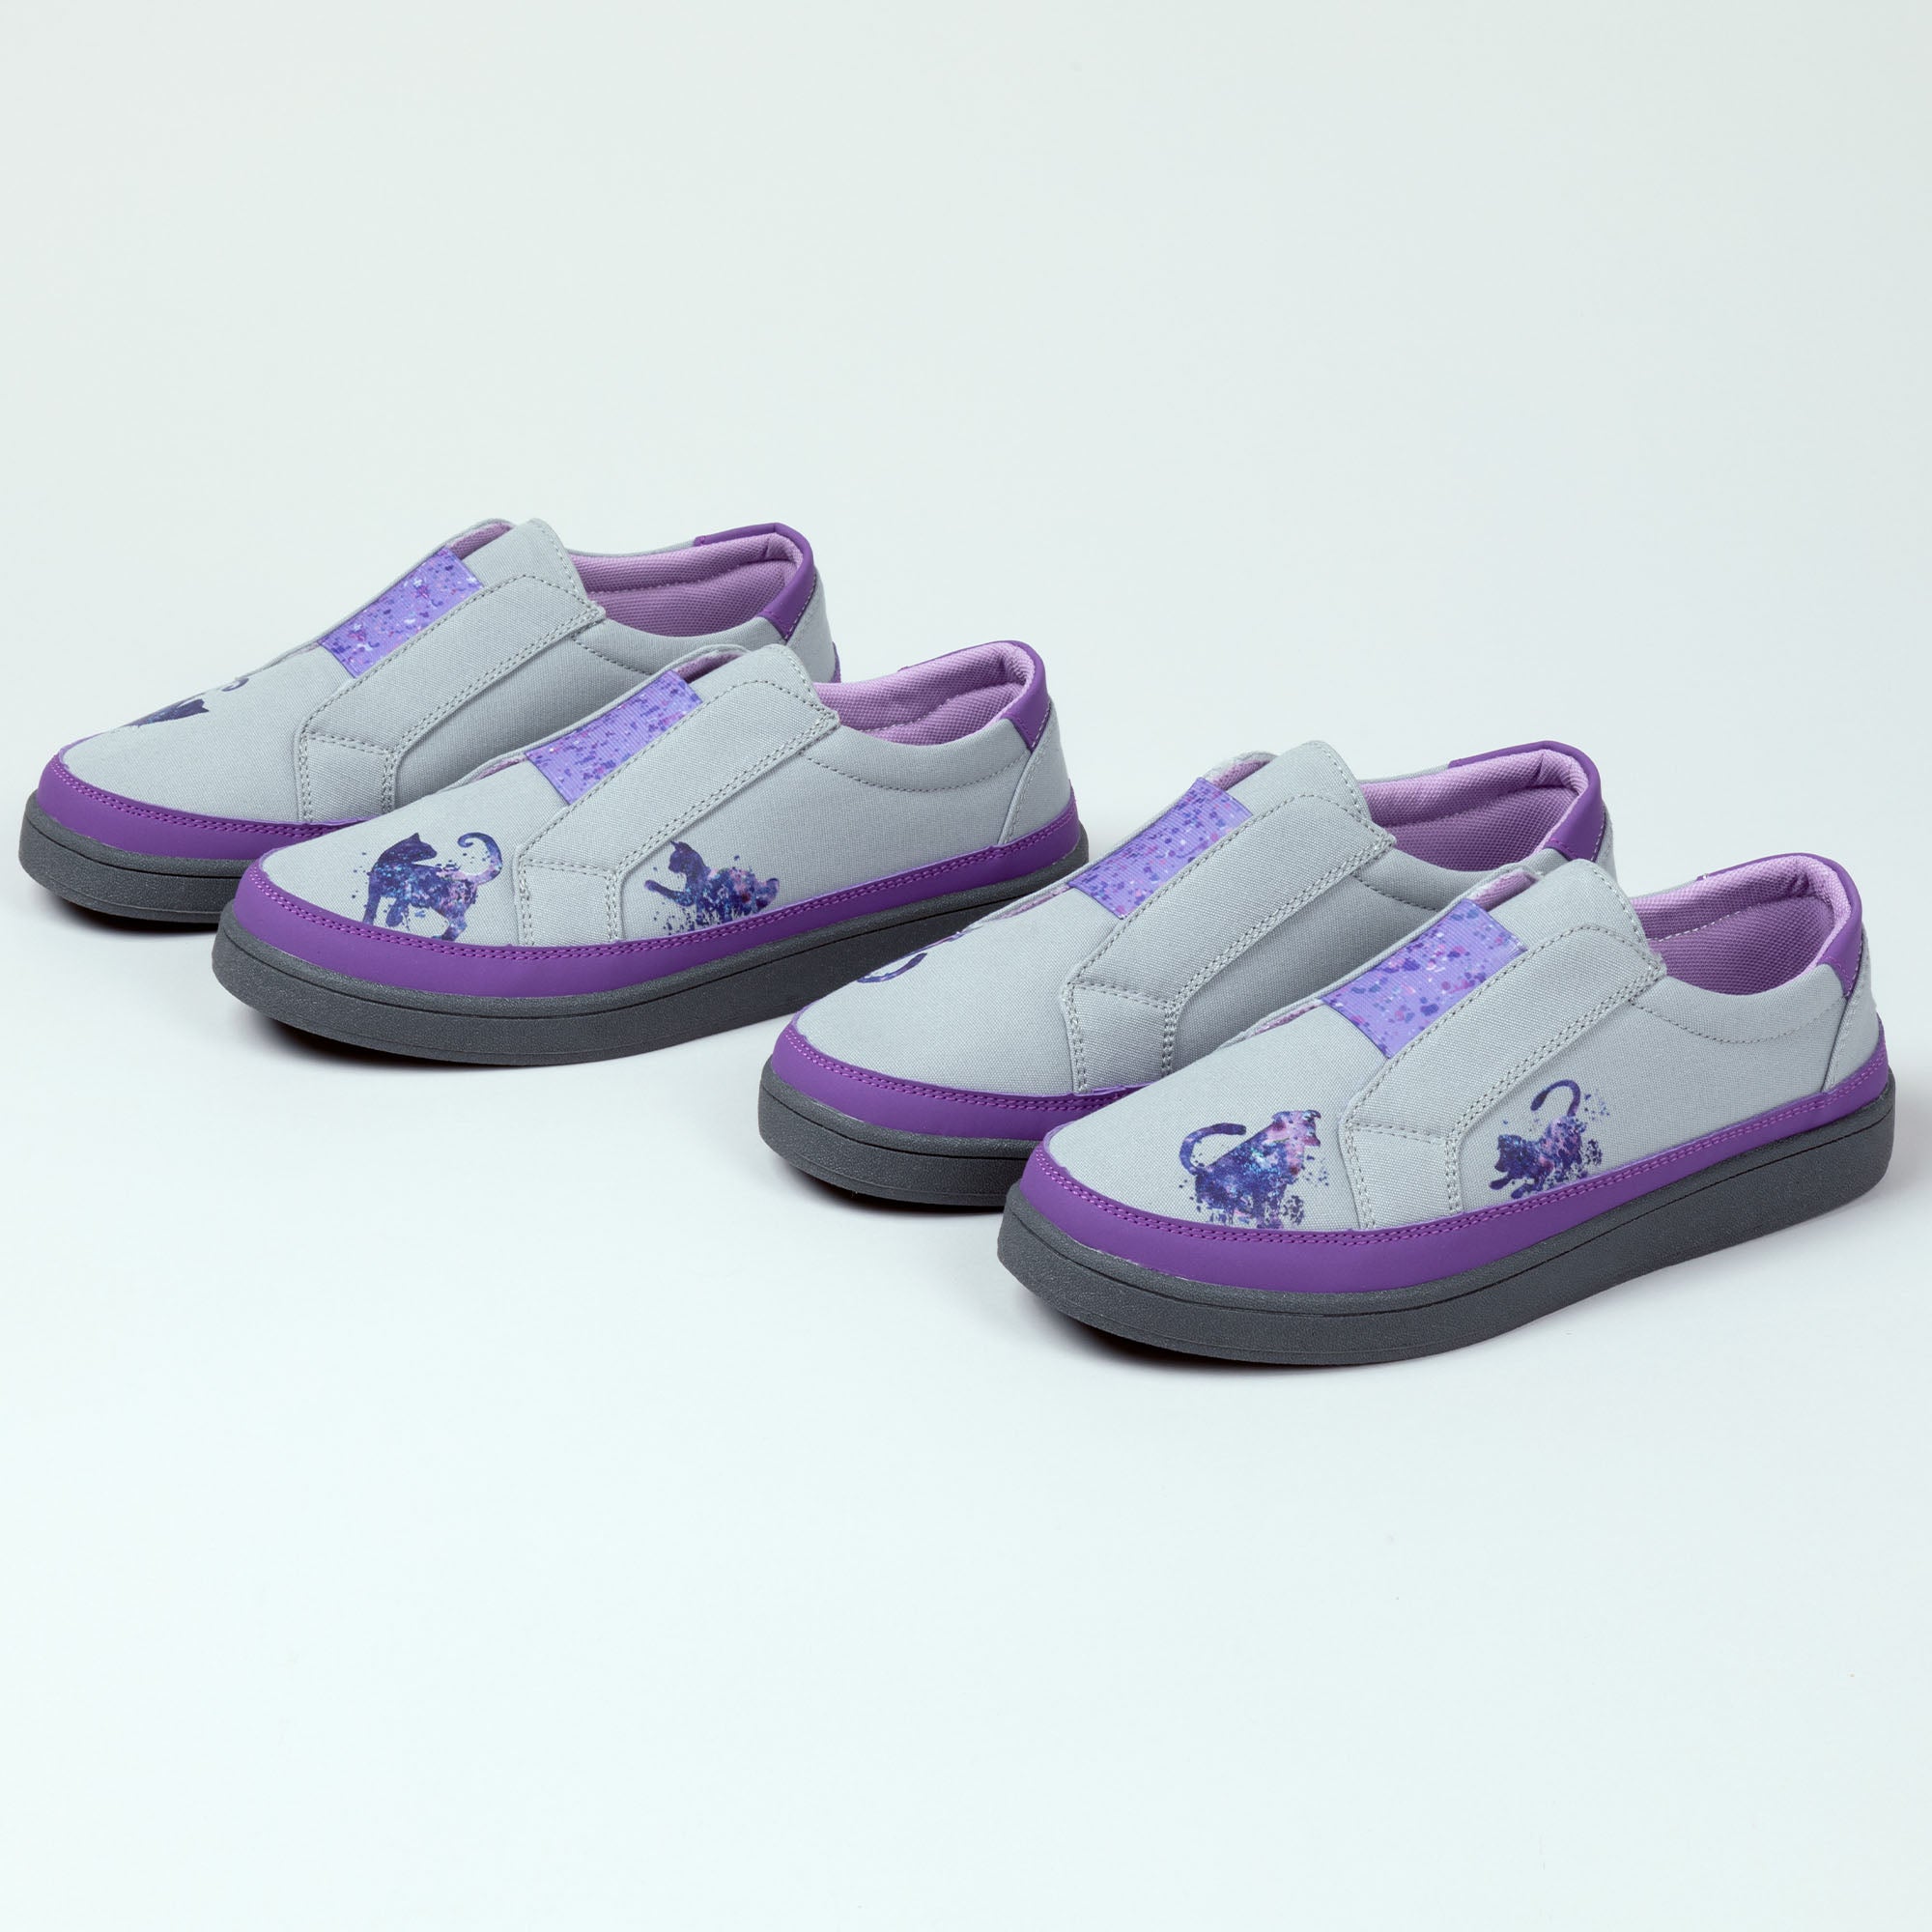 Playful Pets Slip-On Canvas Sneakers - Cat - 7